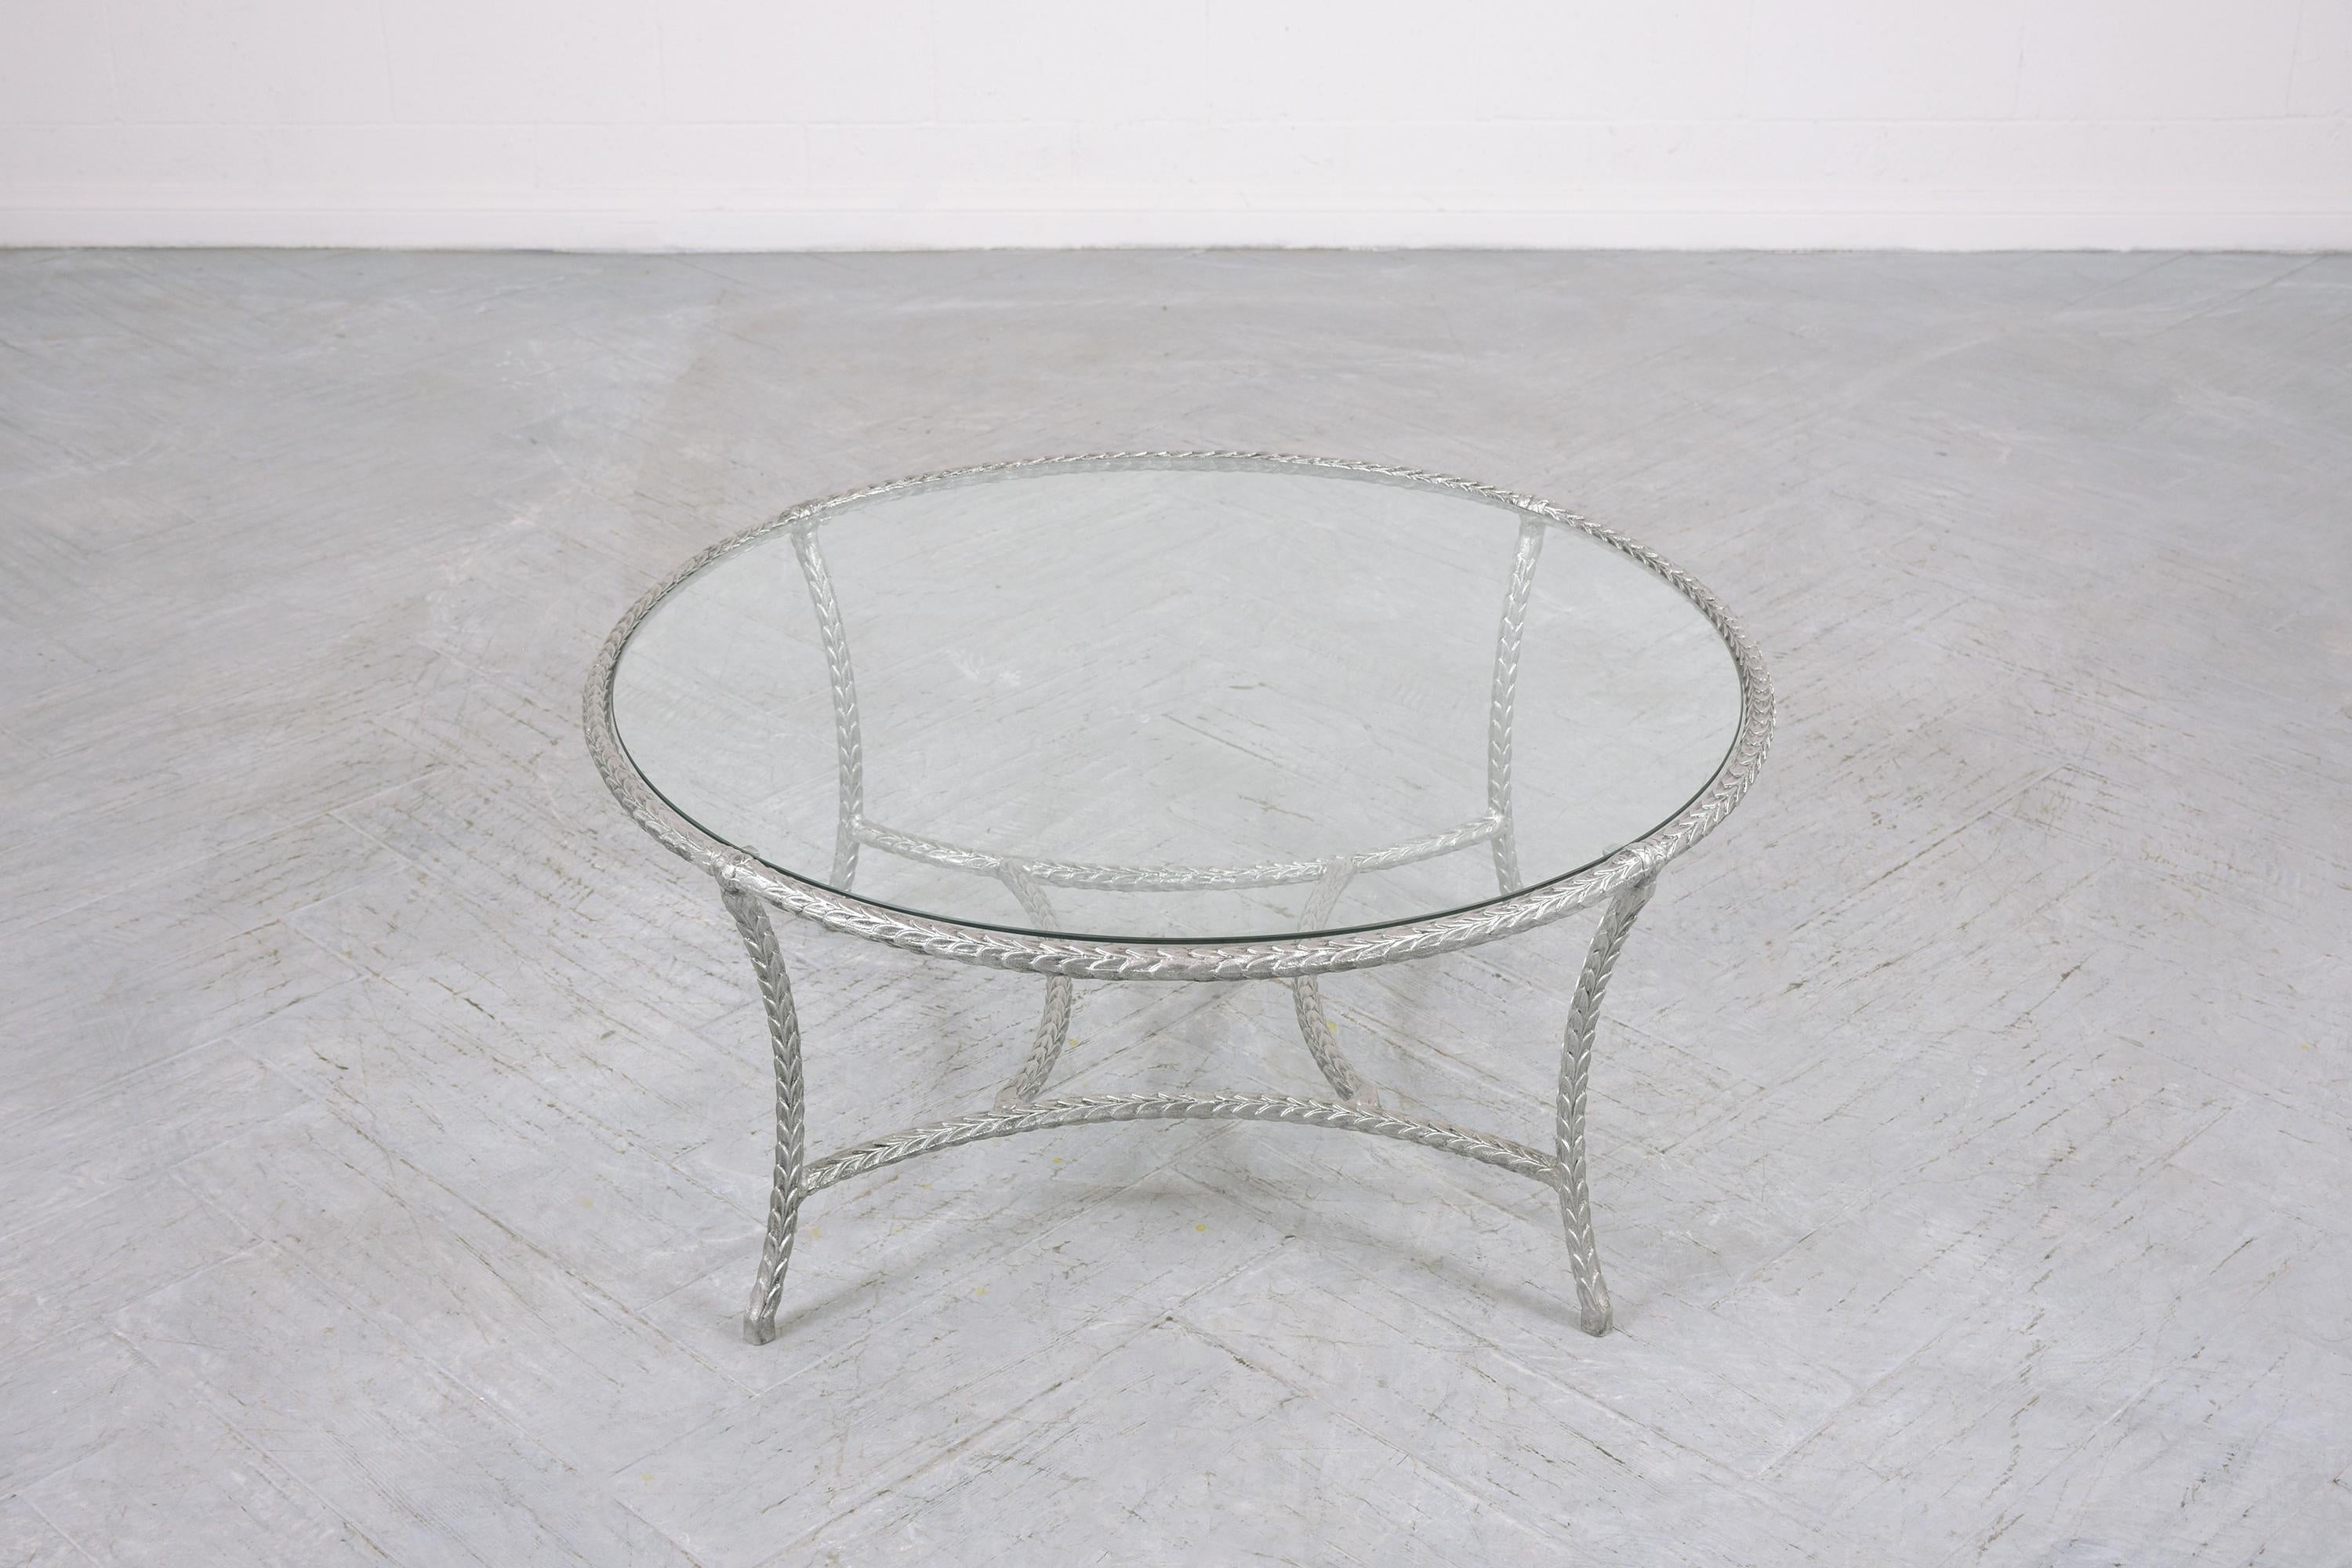 This extraordinary vintage mid-century modern round glass coffee table is in good condition, is hand-crafted out of a metal and glass combination, and has been completely restored by our team of expert craftsmen. This fabulous vintage coffee table